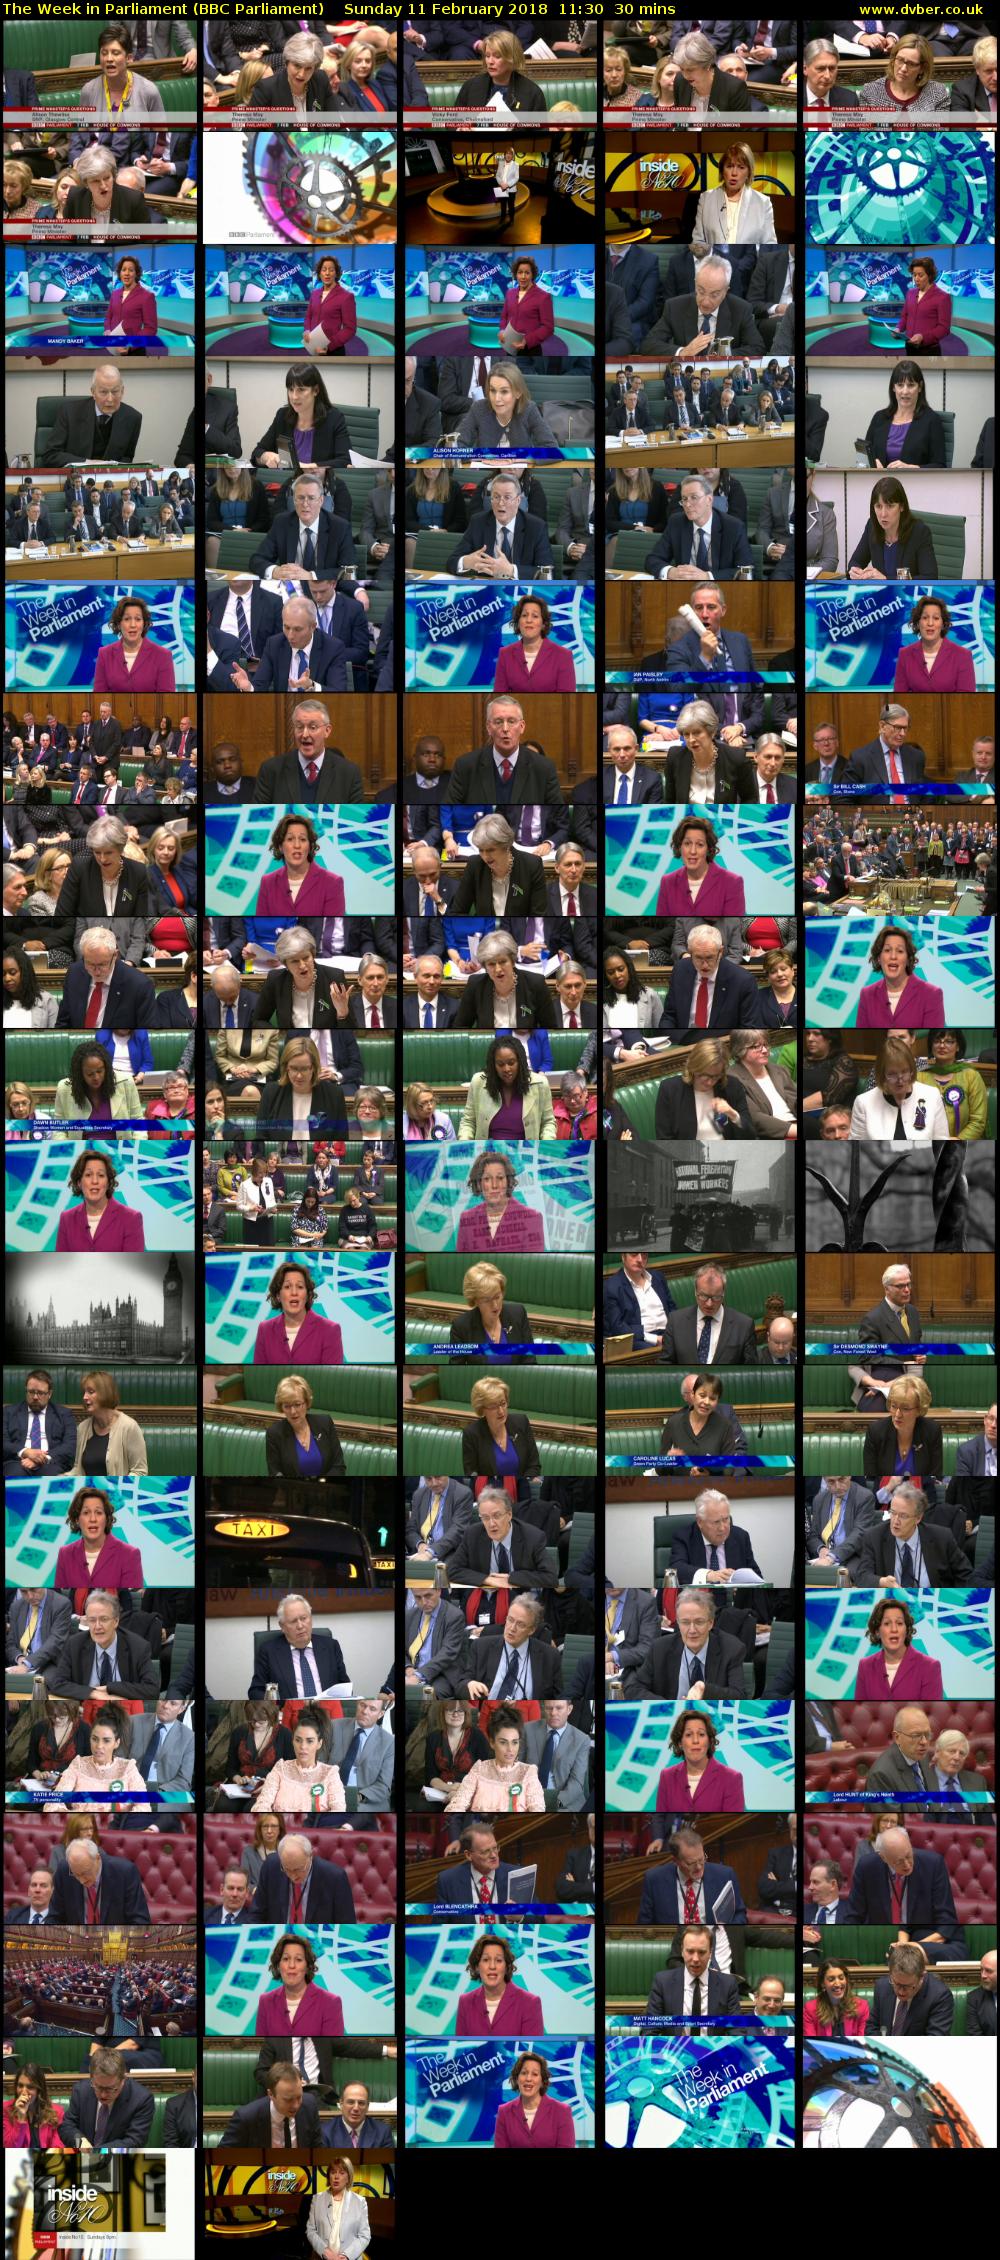 The Week in Parliament (BBC Parliament) Sunday 11 February 2018 11:30 - 12:00